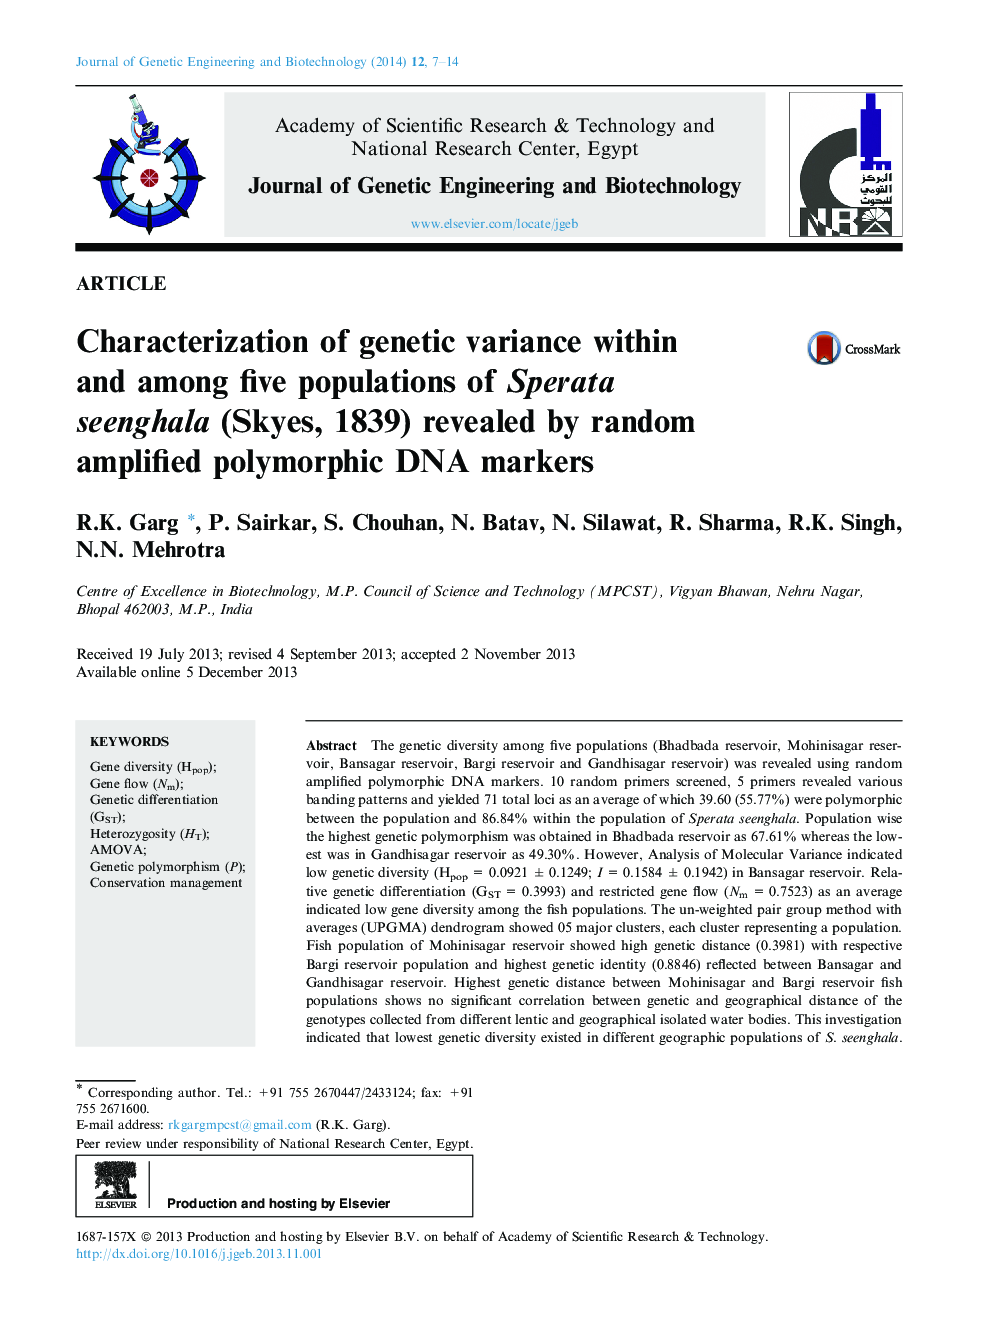 Characterization of genetic variance within and among five populations of Sperata seenghala (Skyes, 1839) revealed by random amplified polymorphic DNA markers 